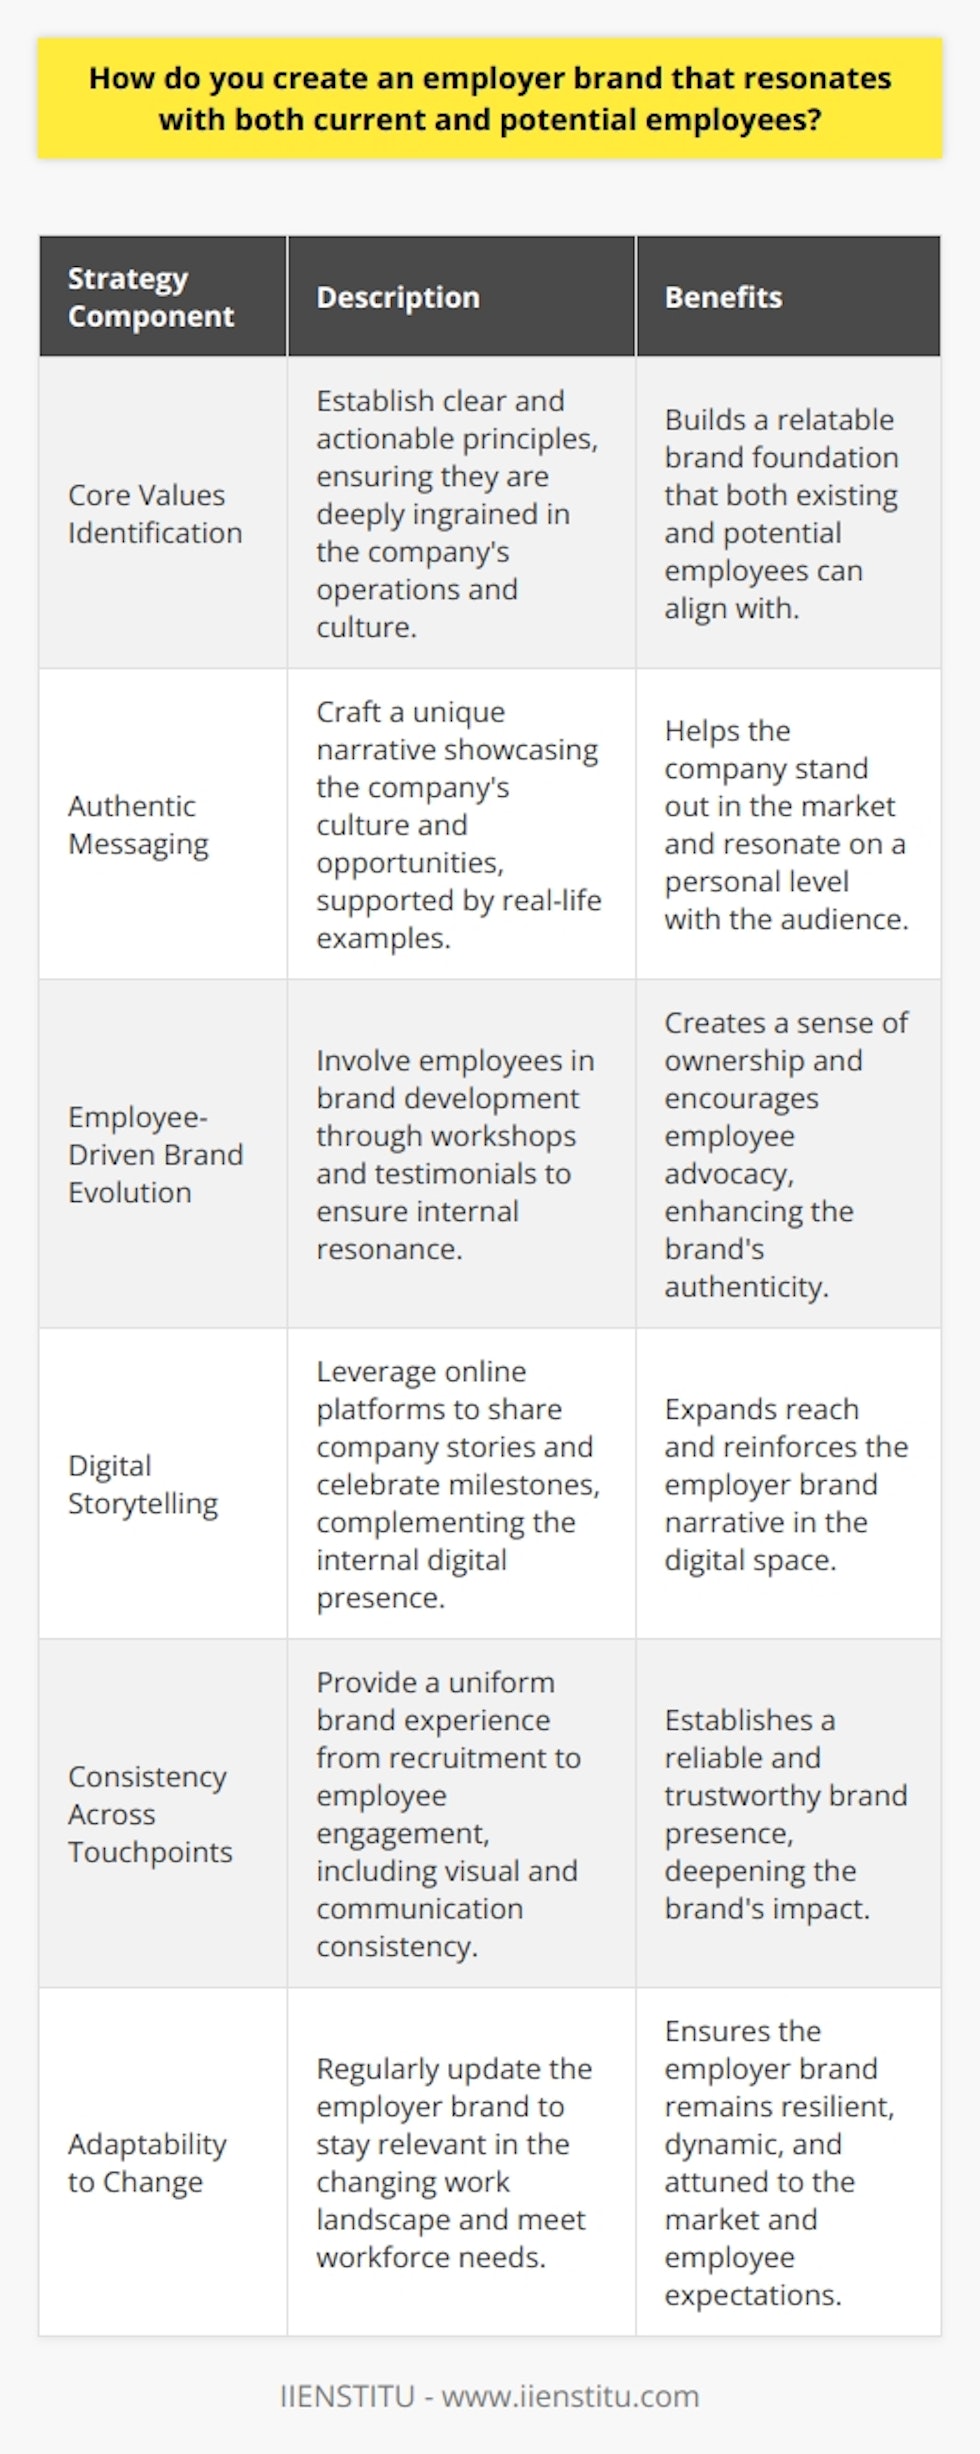 An effective employer brand is one that resonates deeply with both current staff and prospective employees, embodying the company's ethos, values, and aspirations. It's not merely a marketing tool, but a reflection of the company’s identity and how it is experienced by its employees. Here's how to create an employer brand that strikes a chord with the workforce and draws in the talent that can propel a company forward.1. **Identifying and Articulating Core Values:**   Every strong employer brand is built on a foundation of clear core values. These values should not simply be buzzwords, but actionable principles that are manifested in the company's daily operations. Whether it’s innovation, integrity, teamwork, or sustainability, these values must permeate every facet of the organization. Engaging with employees to help identify these values ensures they are genuine and that there is a collective buy-in from the start.2. **Creating Authentic and Memorable Messaging:**   To stand out in a crowded marketplace, a company must go beyond just perks and benefits. It needs to authentically communicate its unique value proposition, that is, why someone would choose to work there over anywhere else. This means the employer brand must differentiate itself through a compelling narrative that reflects its unique culture and opportunities. Rather than merely claiming to be a great place to work, provide examples and stories that illustrate this reality.3. **Employee Participation in Brand Evolution:**   The most authentic employer brands are co-created with employees. Companies can facilitate workshops, surveys, and focus groups to gather insights directly from their teams. This participatory approach ensures that the brand resonates internally, which is fundamental before taking the brand public to potential hires. Employee stories, testimonials, and case studies should be integrated into the employer brand narrative; they not only serve as proof points but also help existing employees become brand ambassadors.4. **Embracing Digital Platforms for Storytelling:**   With the digital world now a primary touchpoint for potential employees, a company’s employer brand strategy must effectively utilize online channels. Platforms like LinkedIn, Glassdoor, and Indeed are important for external audiences, but equally crucial are the internal digital mechanisms like intranets or collaboration tools that reinforce the brand among current employees. Sharing behind-the-scenes content, highlighting employee achievements, and celebrating company milestones online can humanize the brand and enhance its appeal.5. **Consistent Experience Across Touchpoints:**   From the first job advert an applicant sees to the onboarding process and through to ongoing employee engagement programs, the employer brand must be consistently represented. Every touchpoint is an opportunity to deepen the brand’s impact, be it through consistent messaging, visual identity, or the quality of human interactions. Training for managers and leaders is essential to ensure they embody and reinforce the brand in every interaction.6. **Adaptability to Change:**   A static employer brand is a brittle one. To remain relevant, a company must continually refine its brand according to the evolving landscape of work, demographic shifts, and the dynamic needs of the workforce. Stay attuned to broader trends, listen to employee feedback, and be ready to pivot strategies to maintain an employer brand that keeps pace with change.Creating a cohesive employer brand is not a one-off exercise; it's an ongoing process of alignment and conversation between a company and its employees. By focusing on authenticity, inclusiveness, communication, consistency, and agility, an organization can form an employer brand that not only attracts potential talent but inspires current employees and instills a sense of pride in being part of the company's journey.